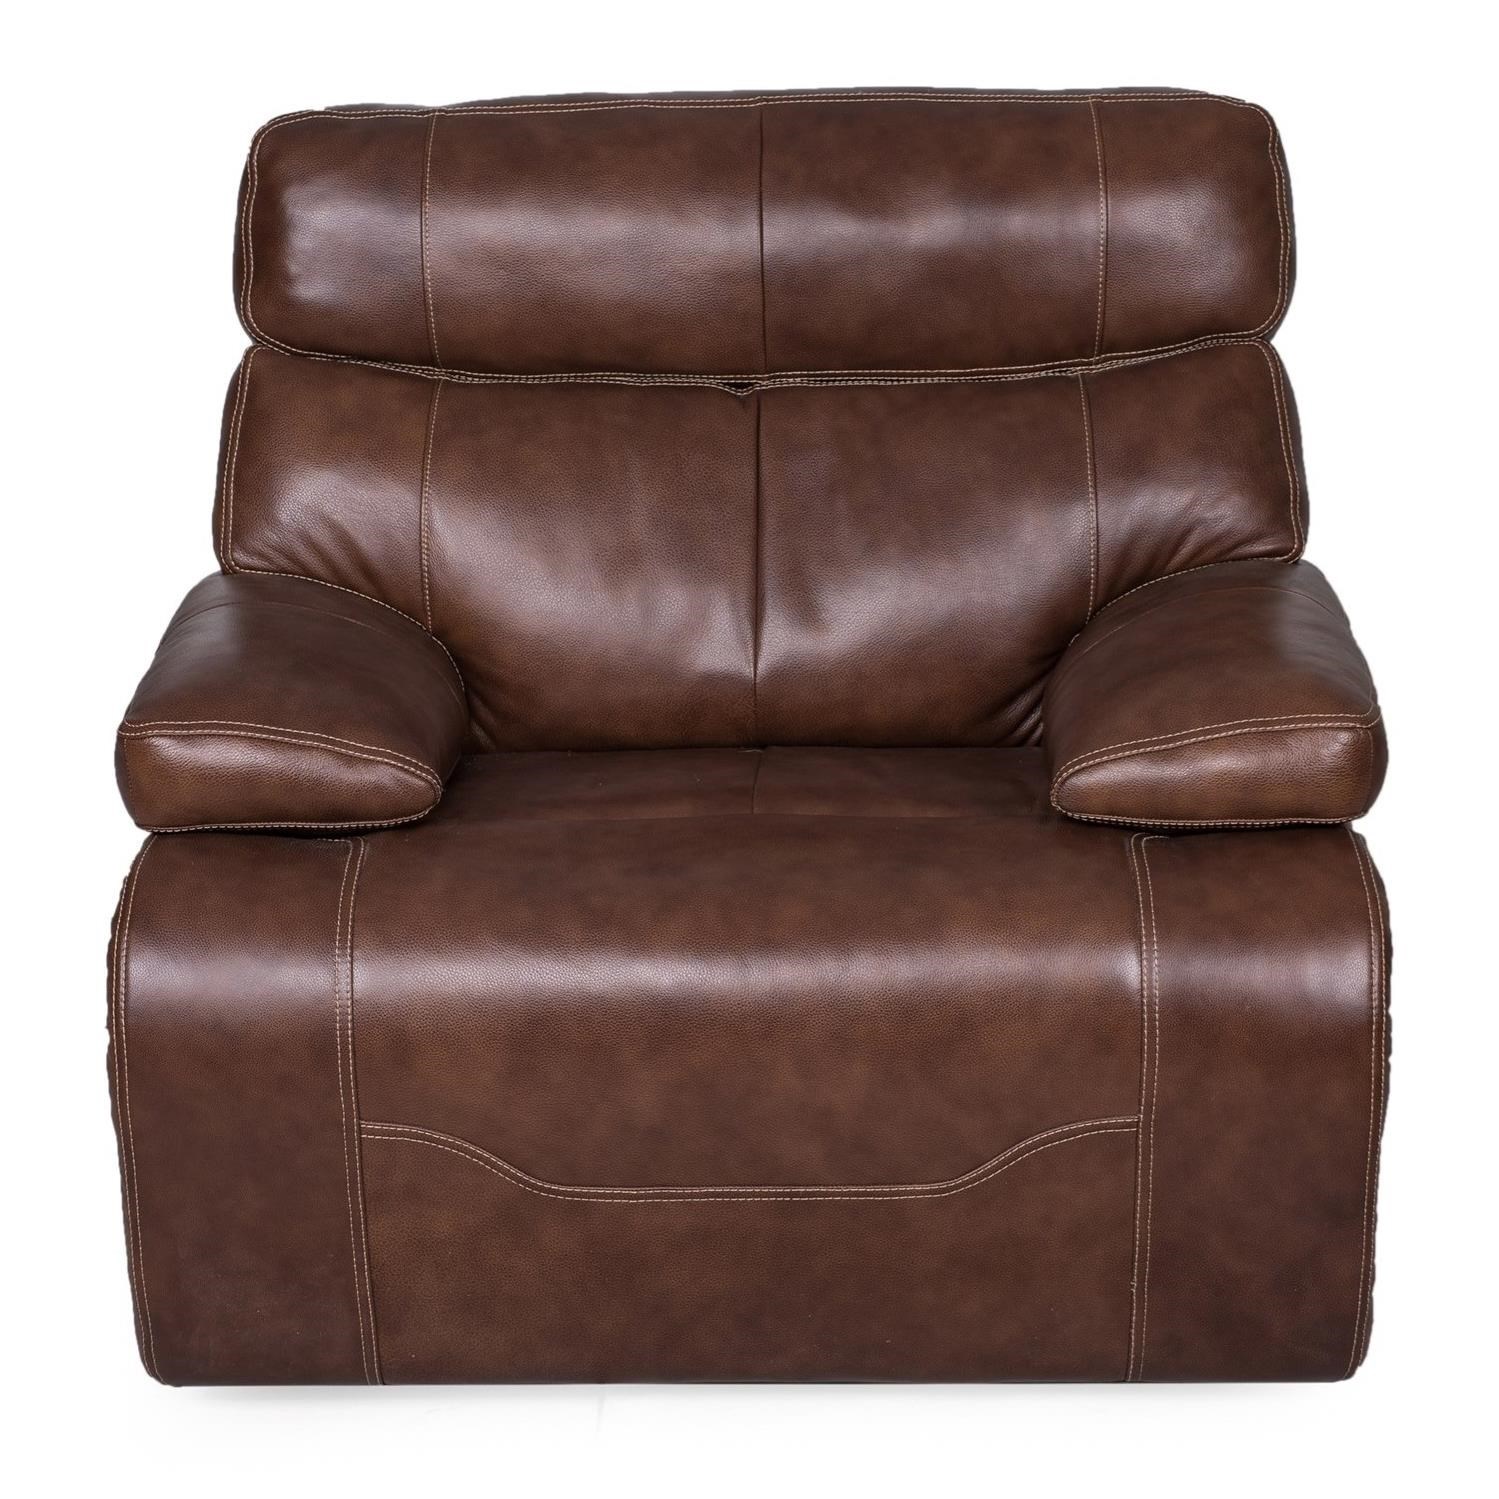 Power Wall Saver Recliner with Power Head/Lumbar and USB Charging Port 